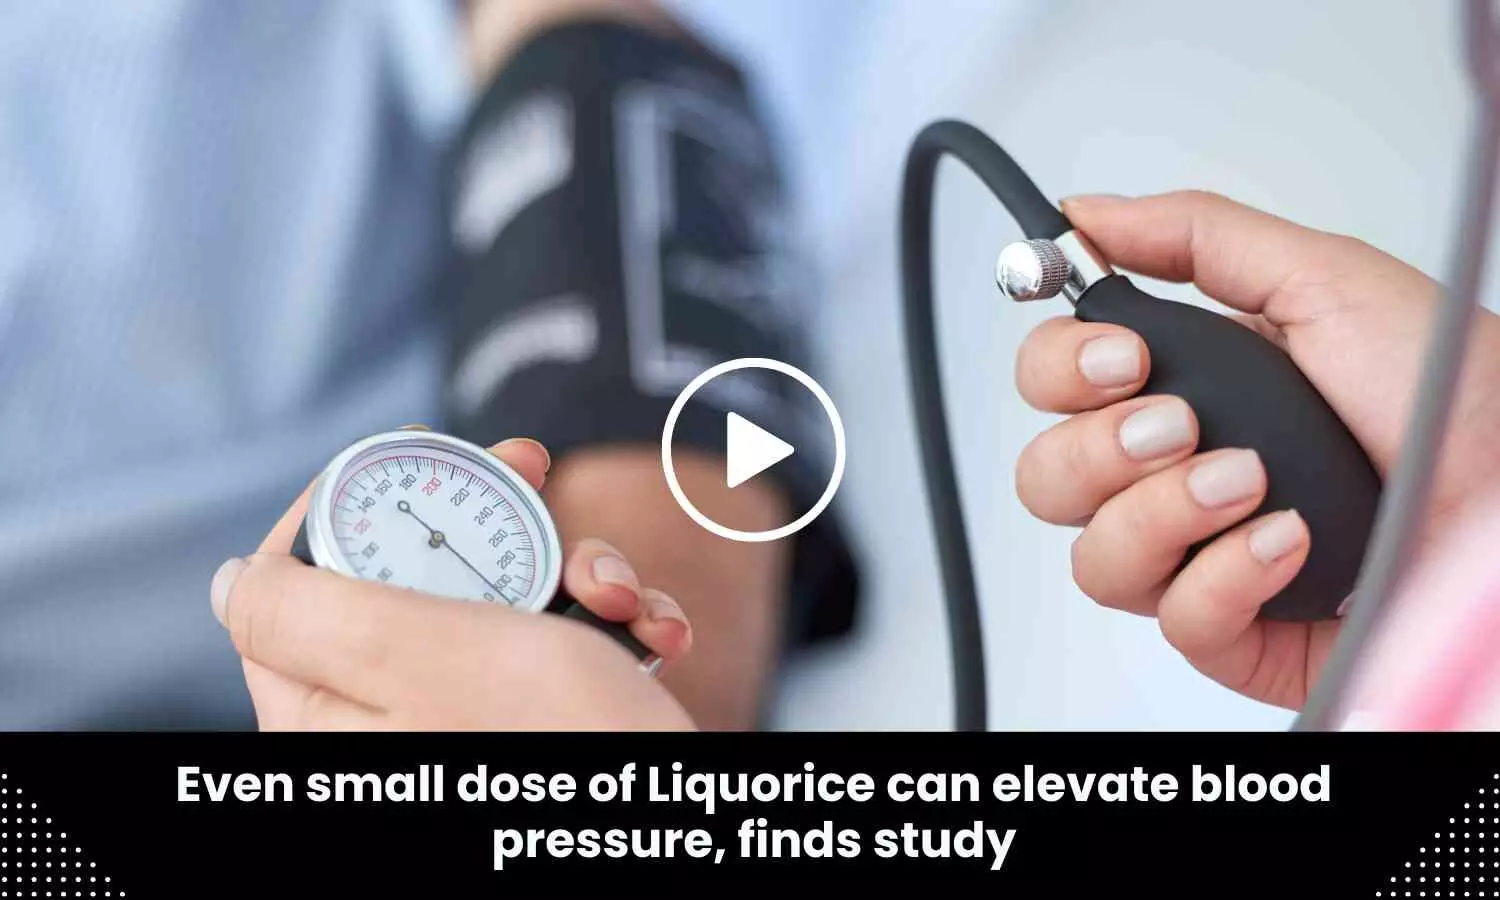 Even small dose of Liquorice can elevate blood pressure, finds study